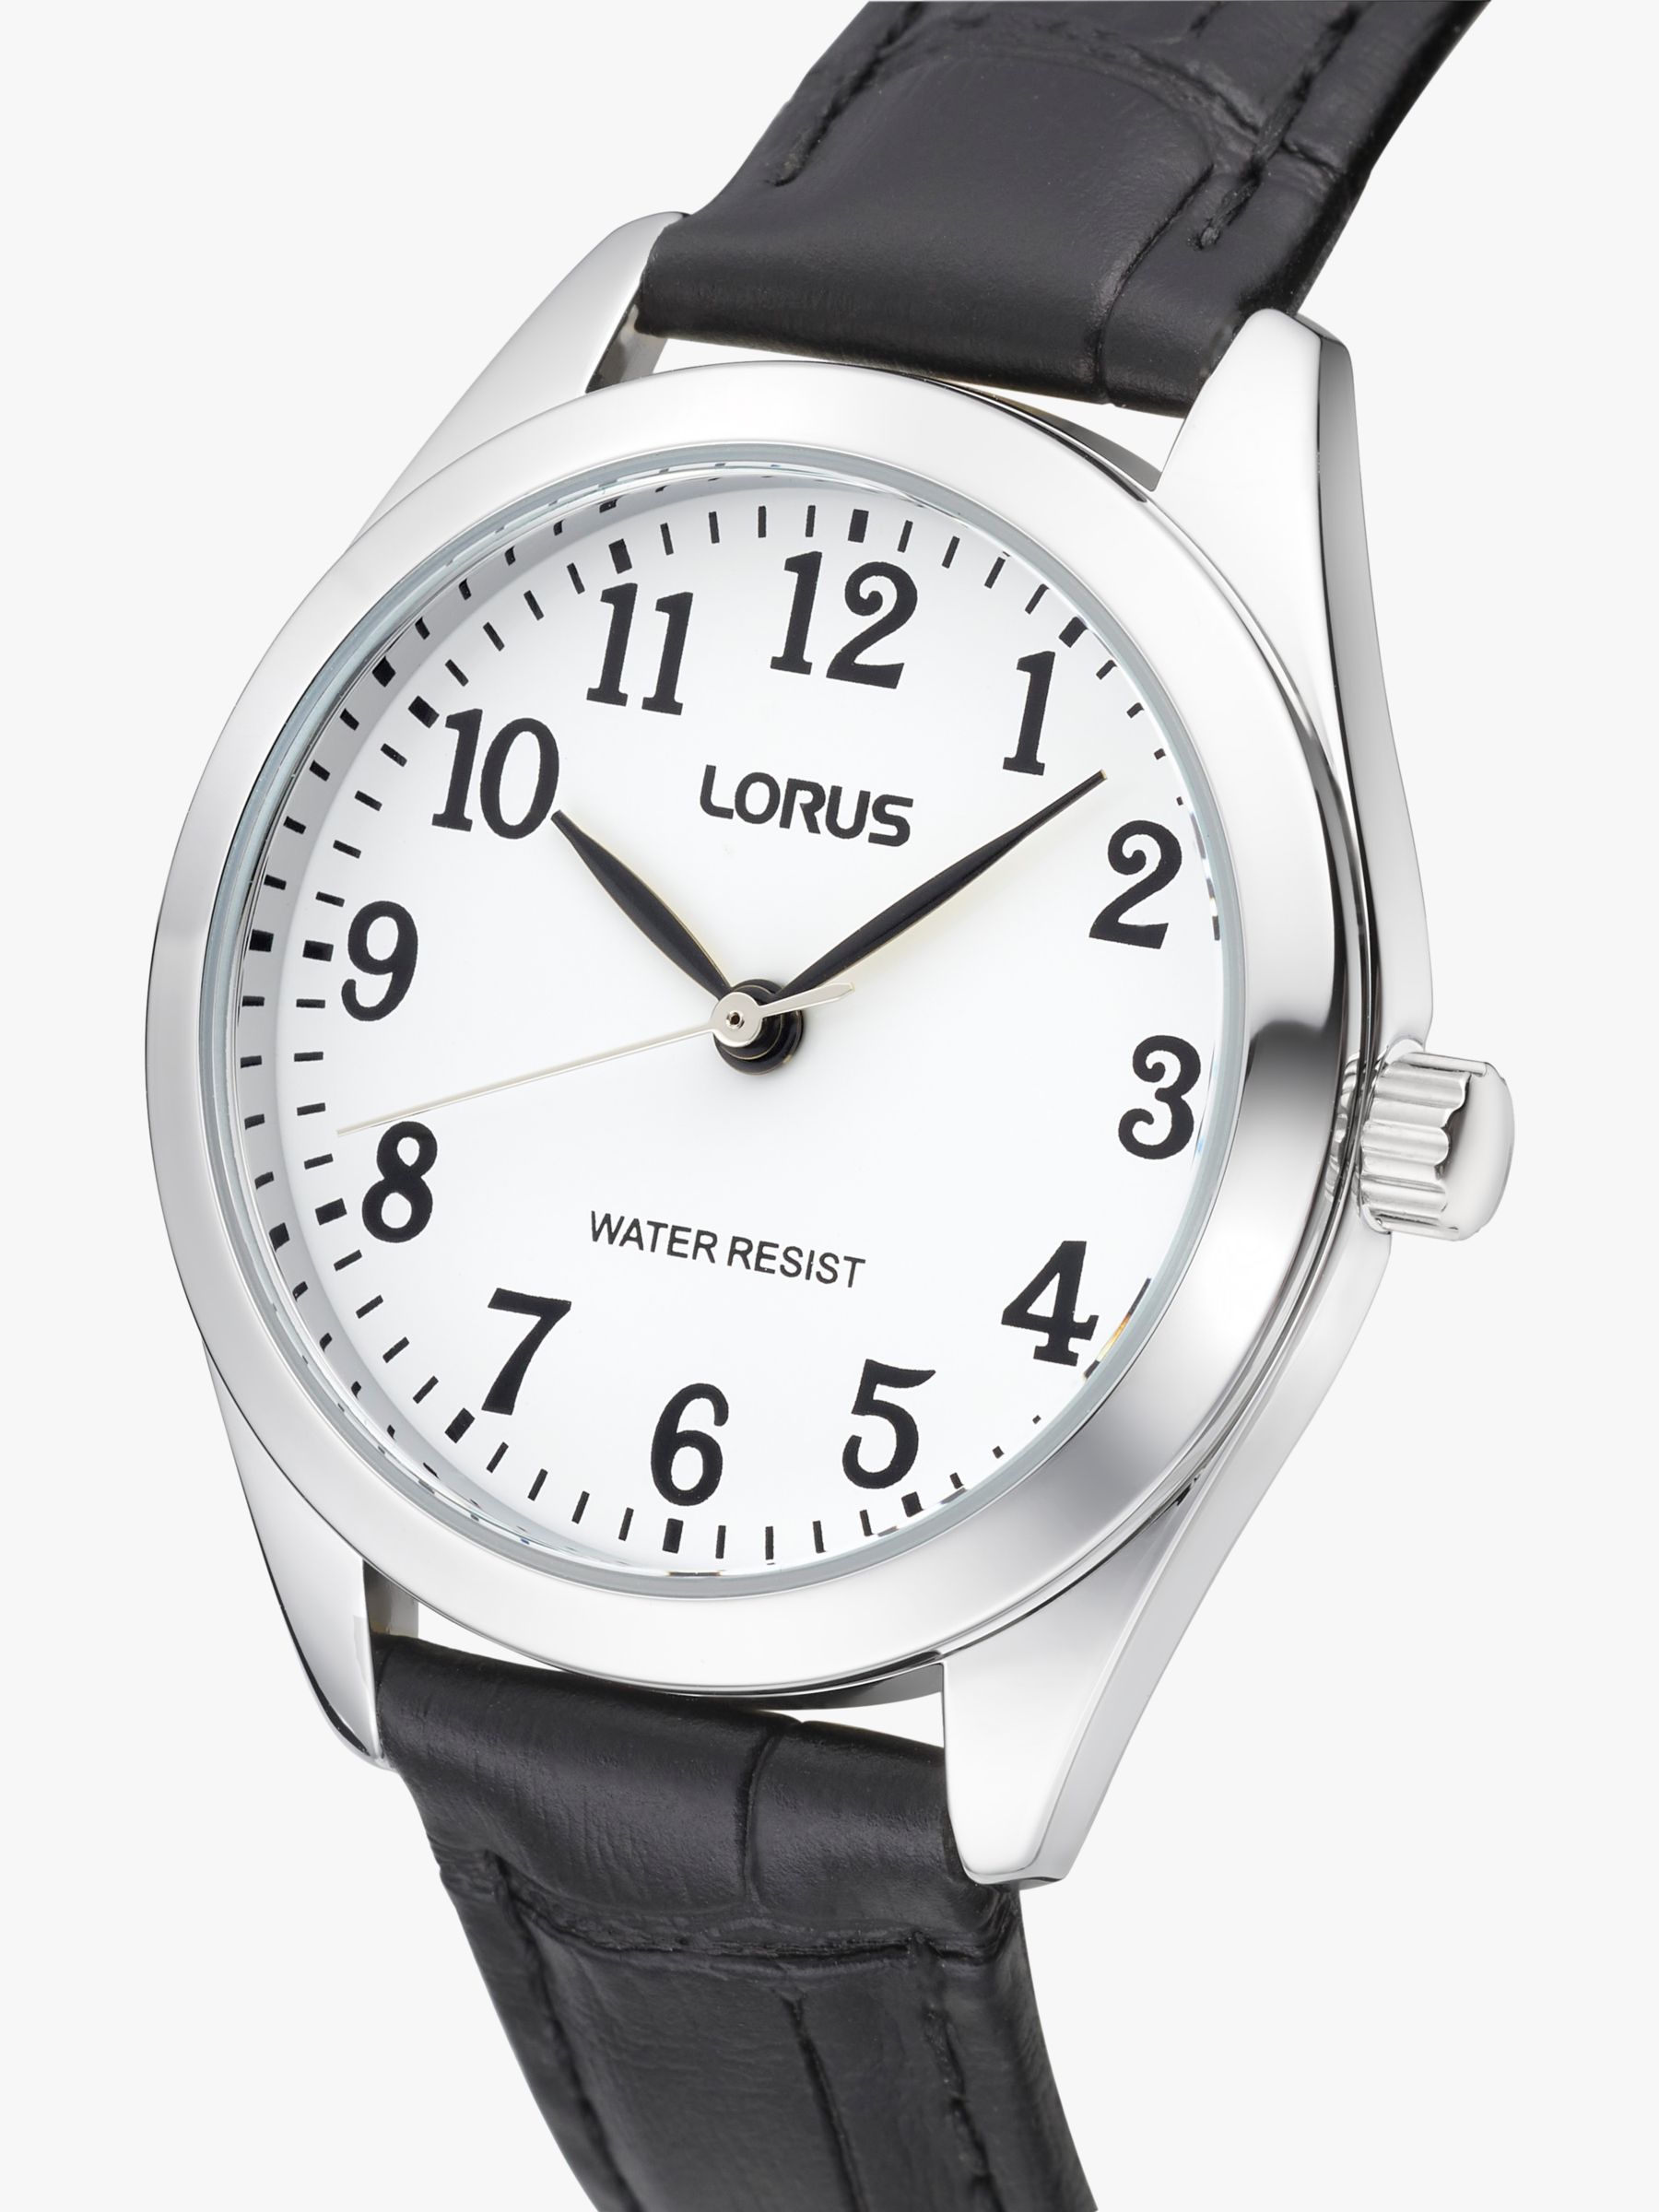 Buy Lorus Women's Leather Strap Watch Online at johnlewis.com